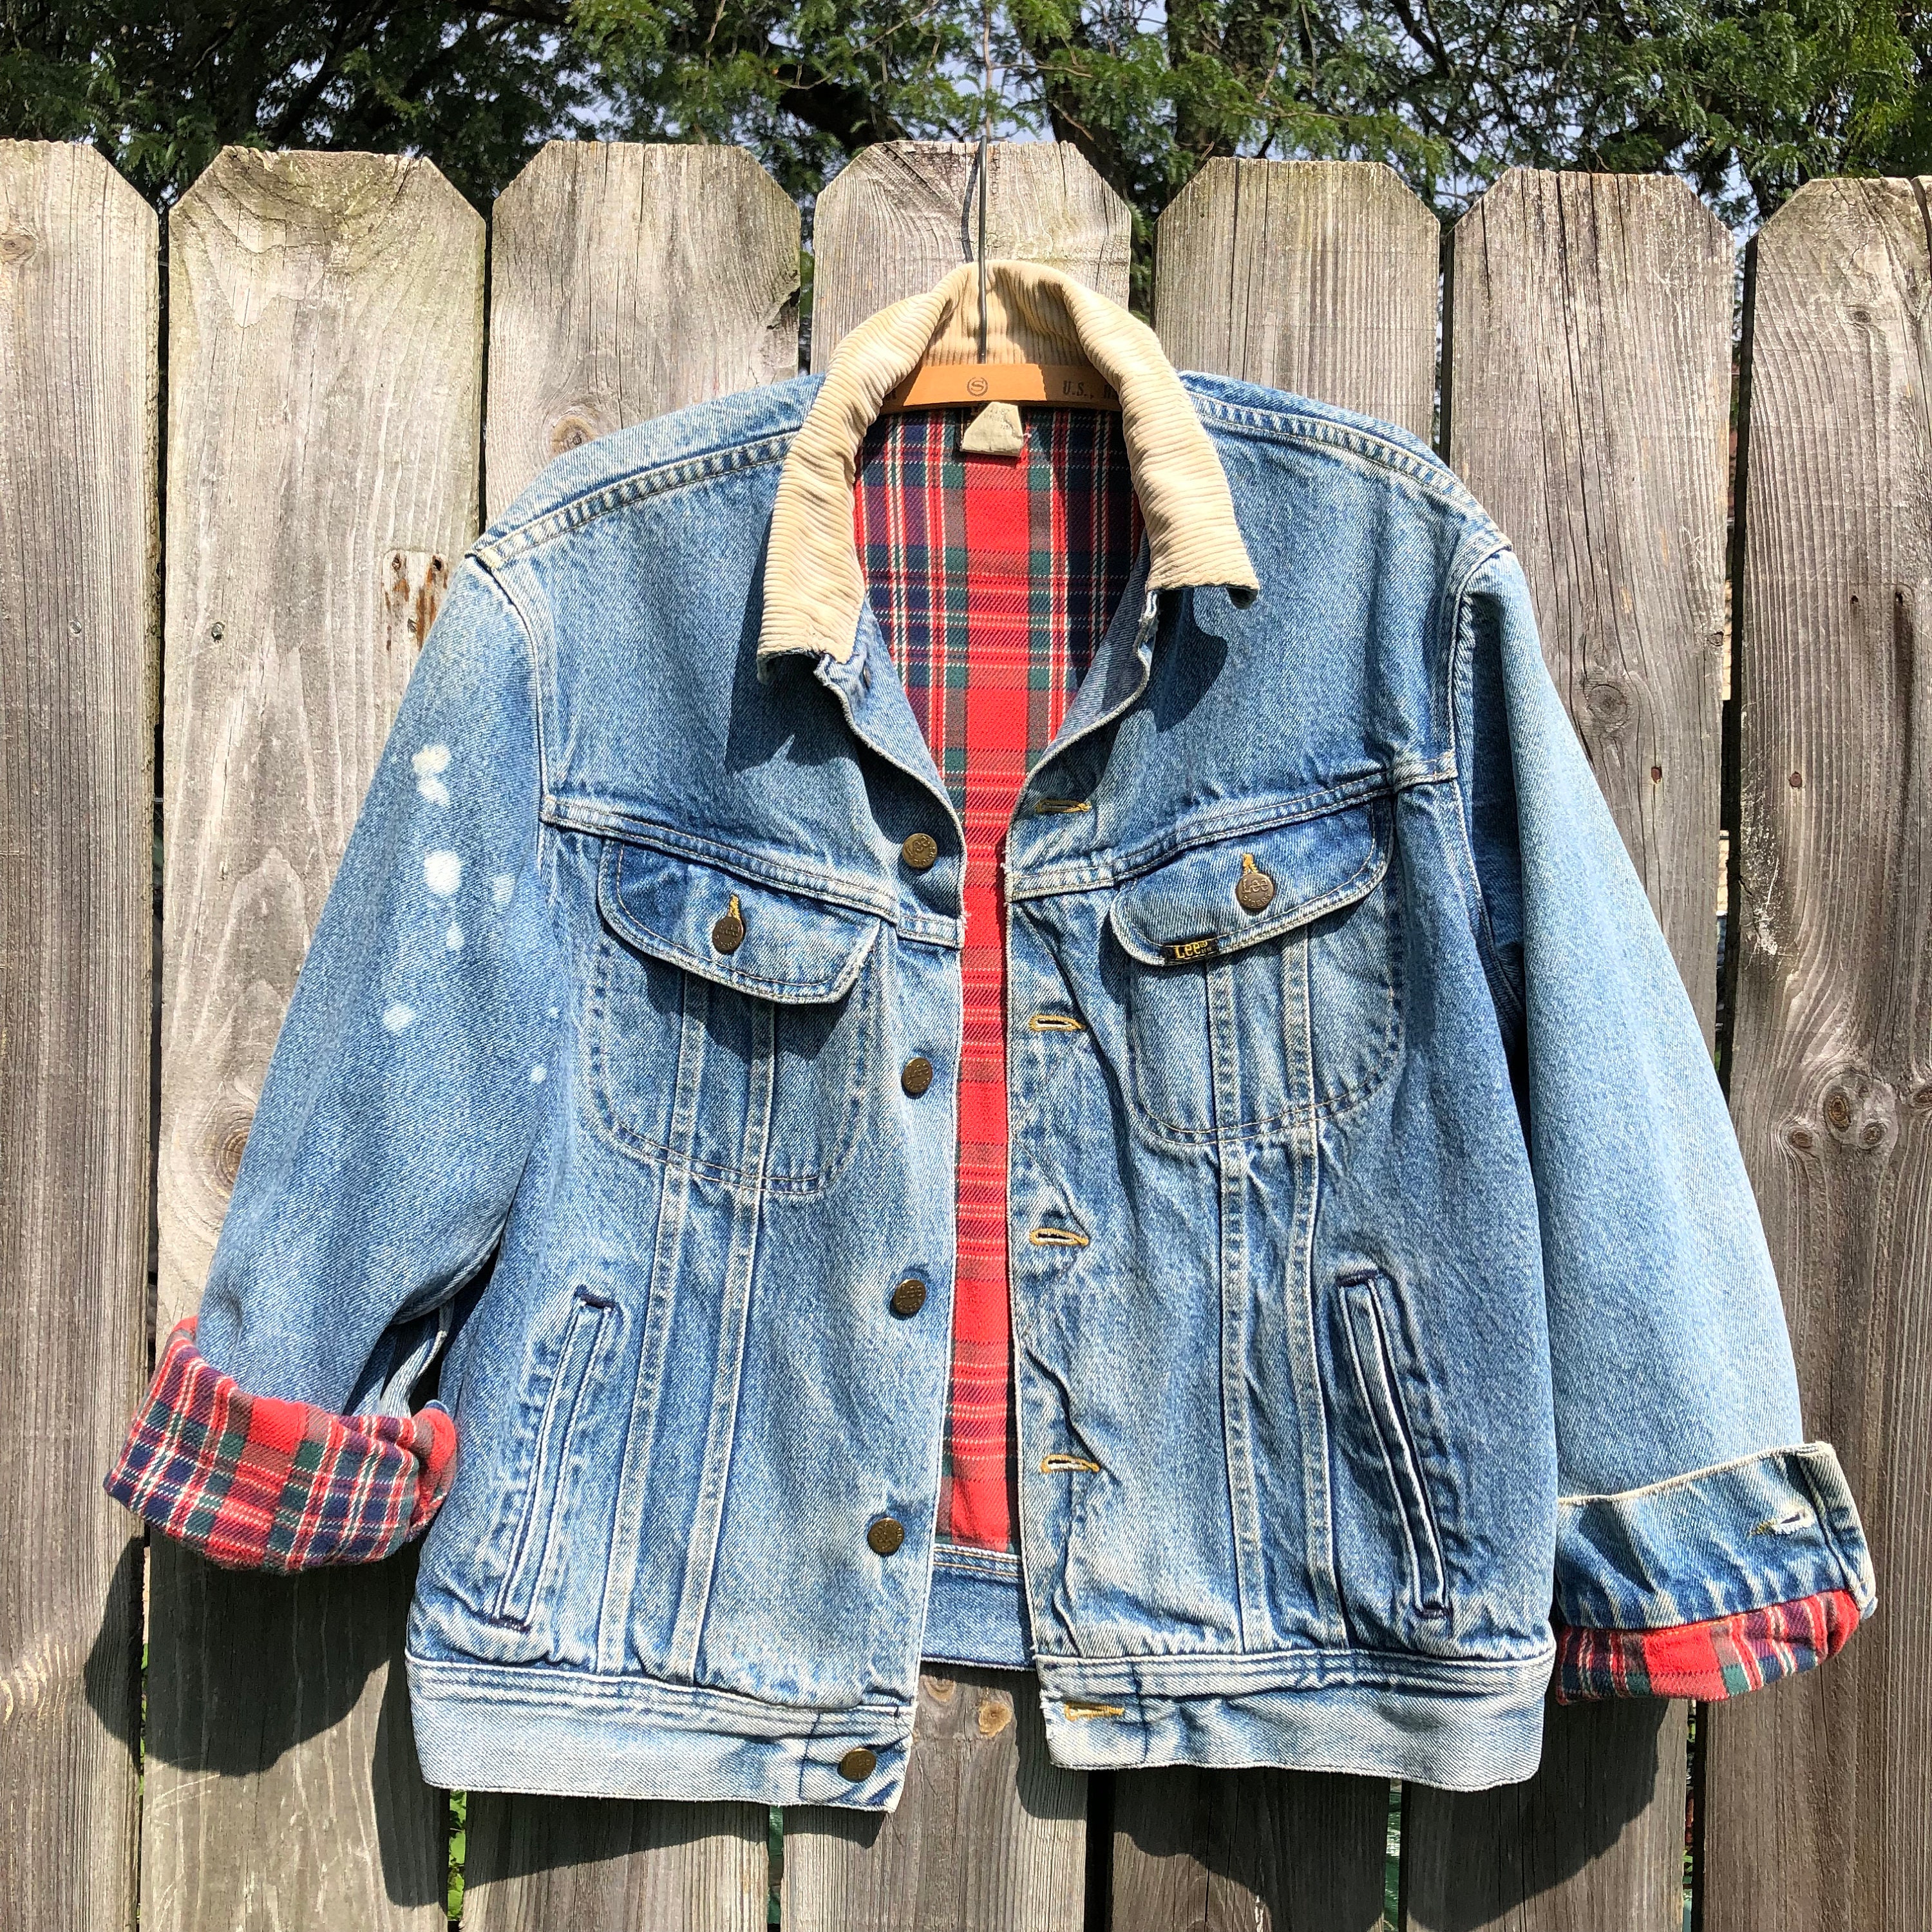 Reclaimed Vintage oversized padded denim jacket with cord collar